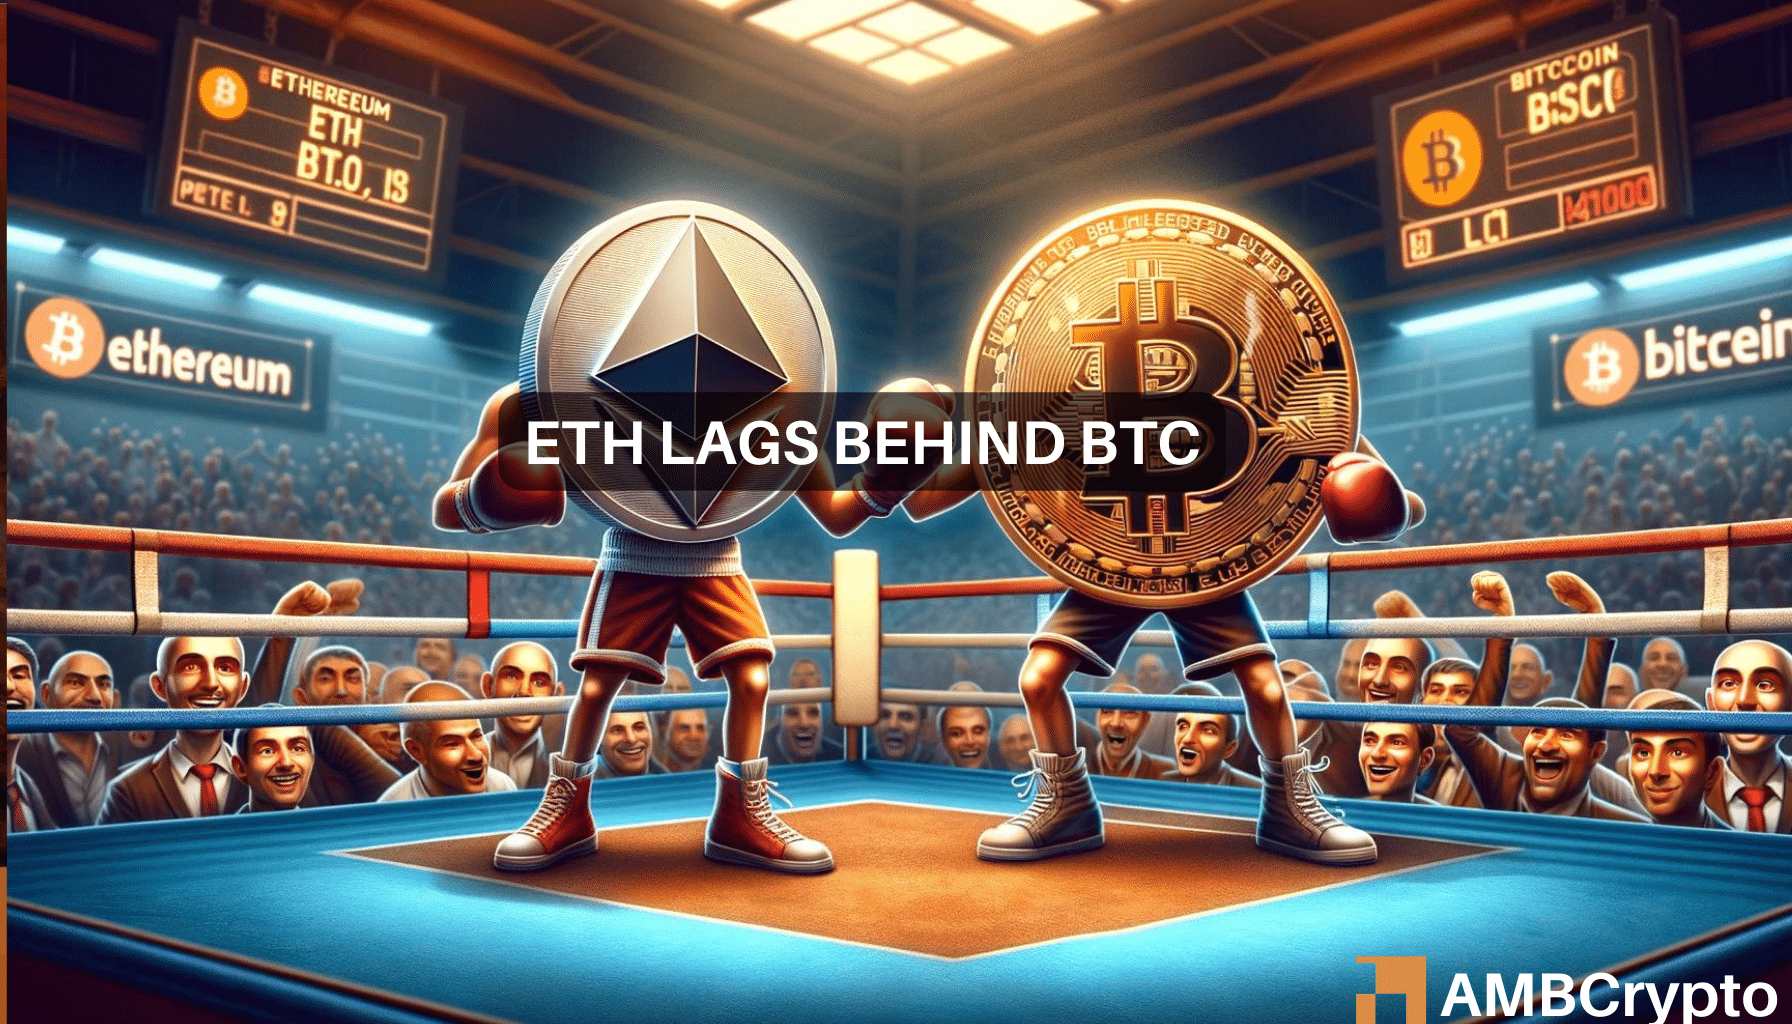  How the kings have fared since BTC's ETF approval